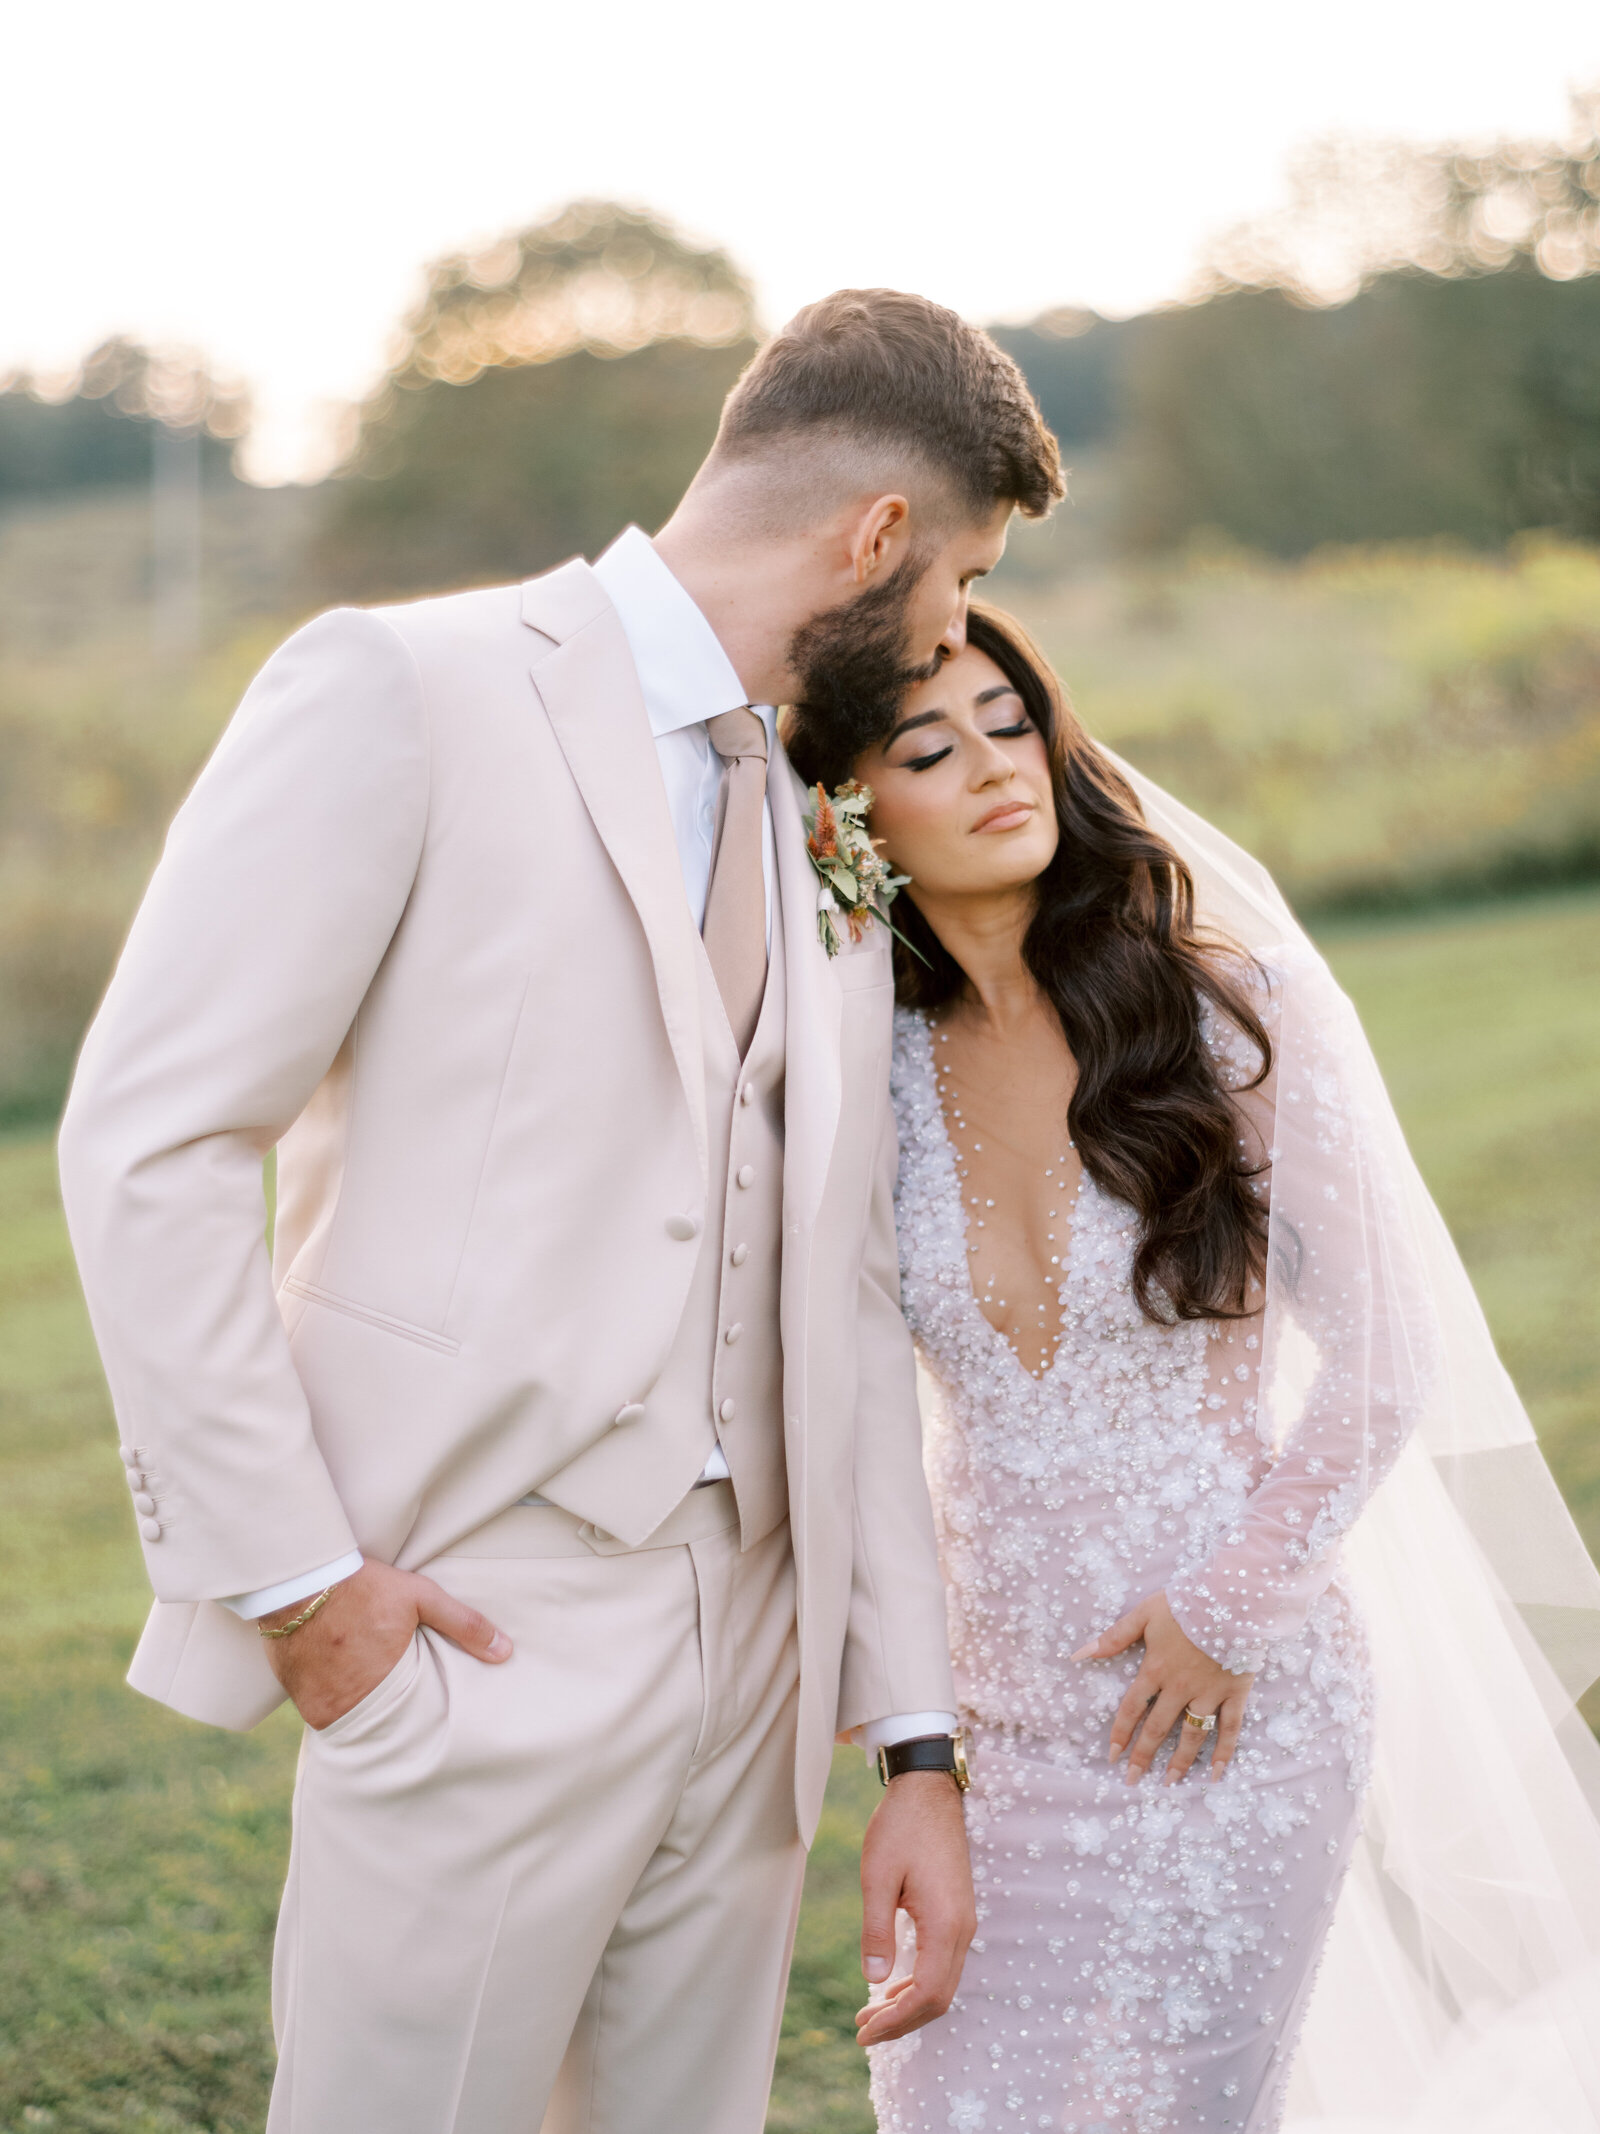 Lindsay Lazare Photography New York Wedding Engagement Photographer Hudson Valley Destination Travel Intentional Timeless Connection Drive Luxury Heirloom Photographs Photos  LLPF1736